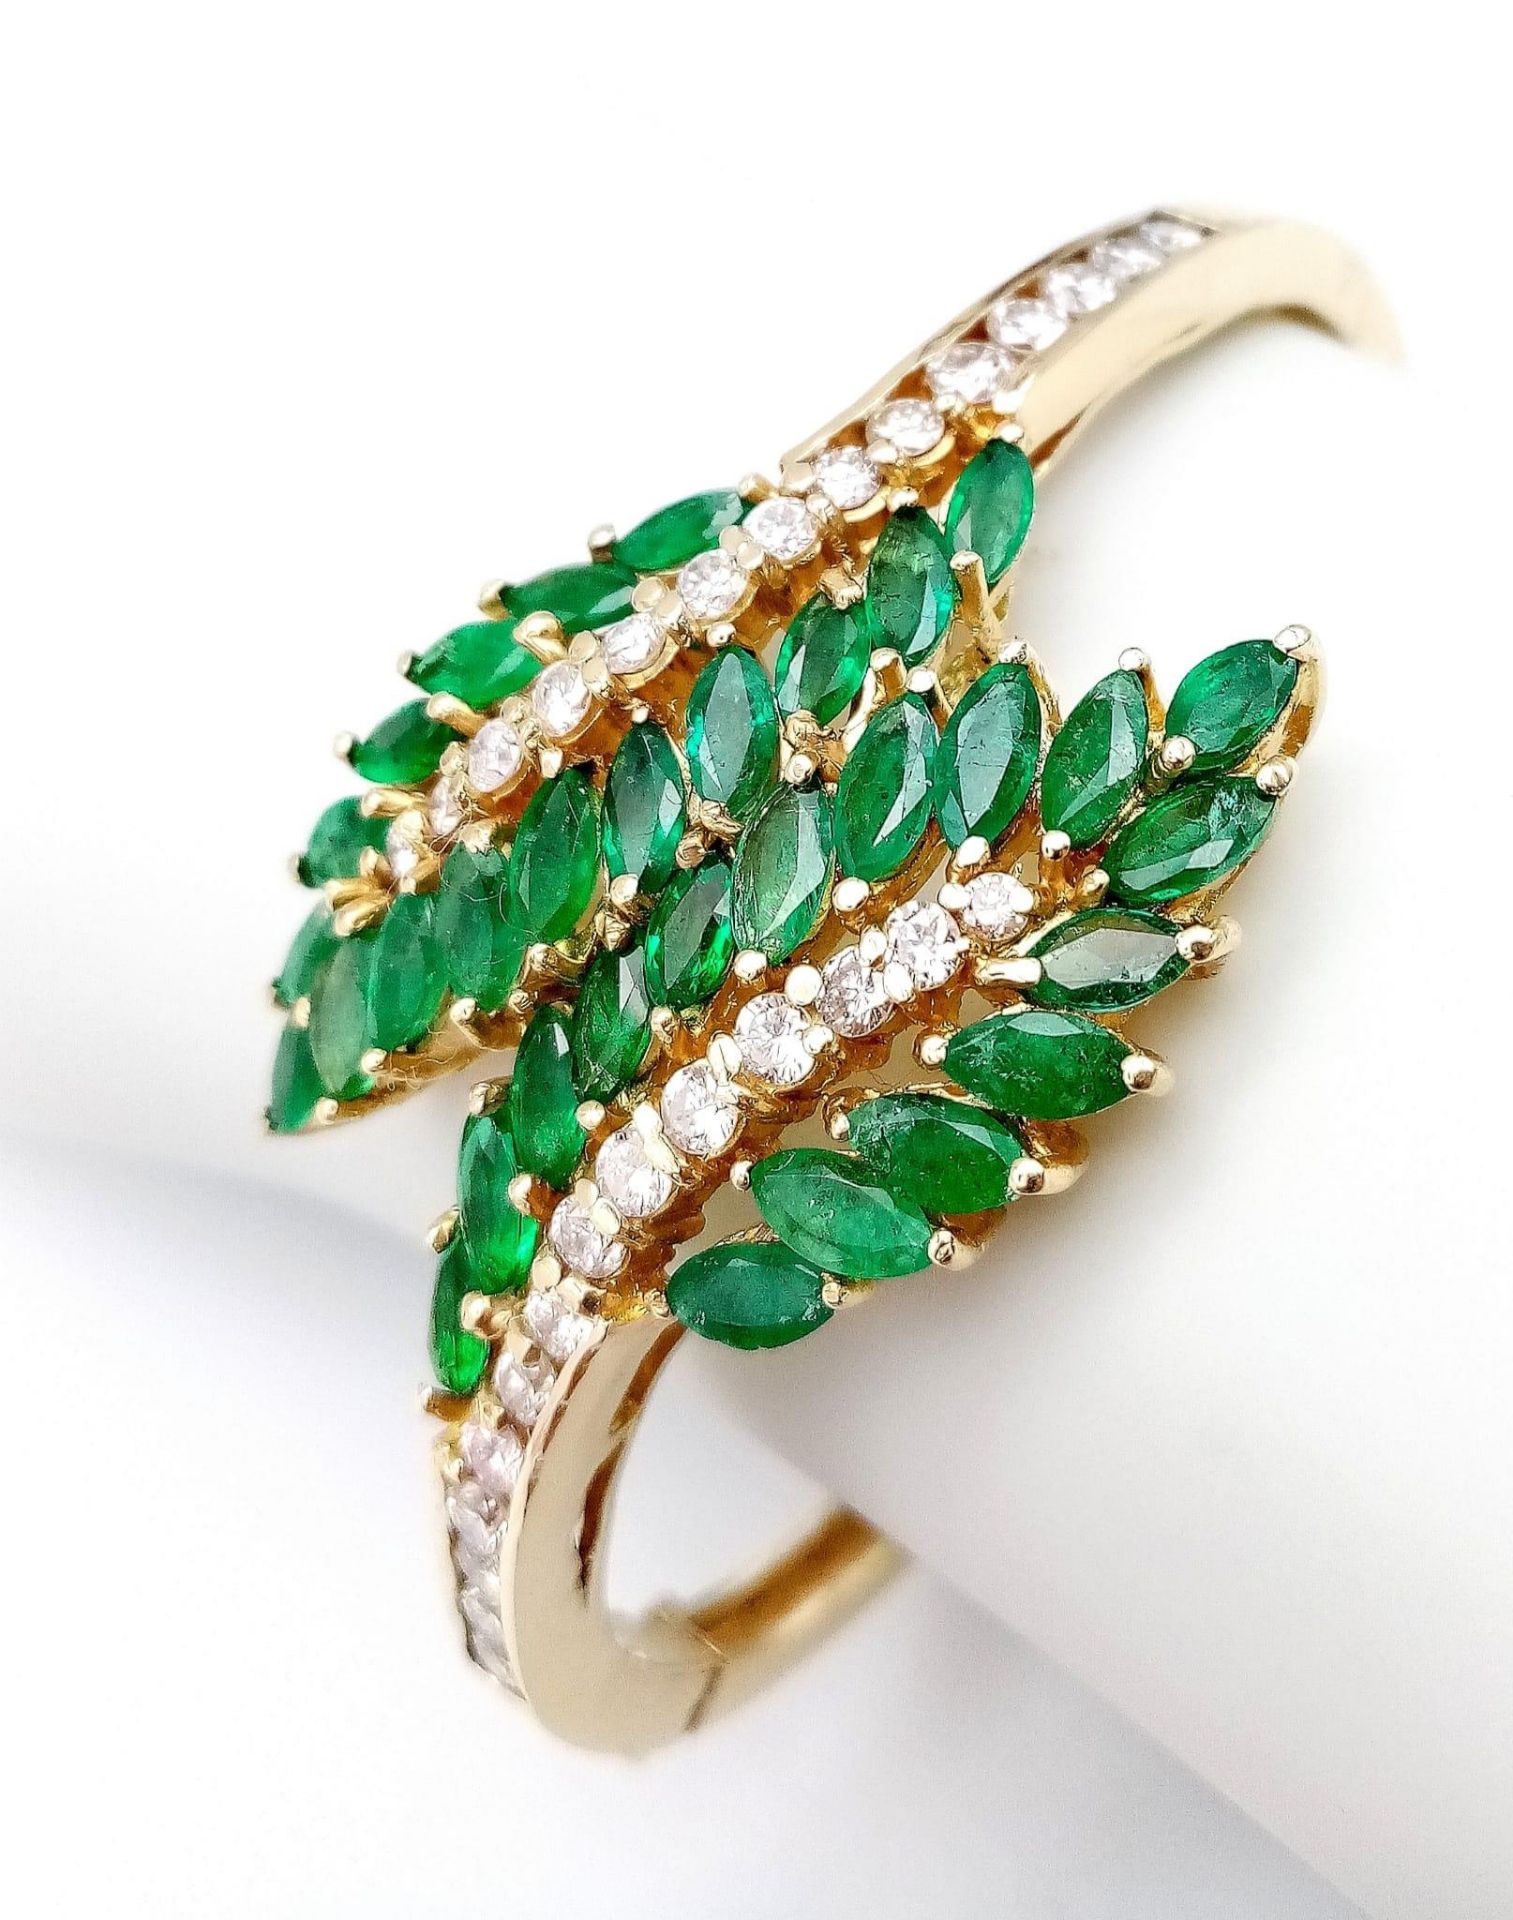 A DIAMOND AND EMERALD LEAF DESIGN BANGLE IN CROSSOVER STYLE SET IN18K GOLD . 33.5gms 10457 - Image 8 of 15